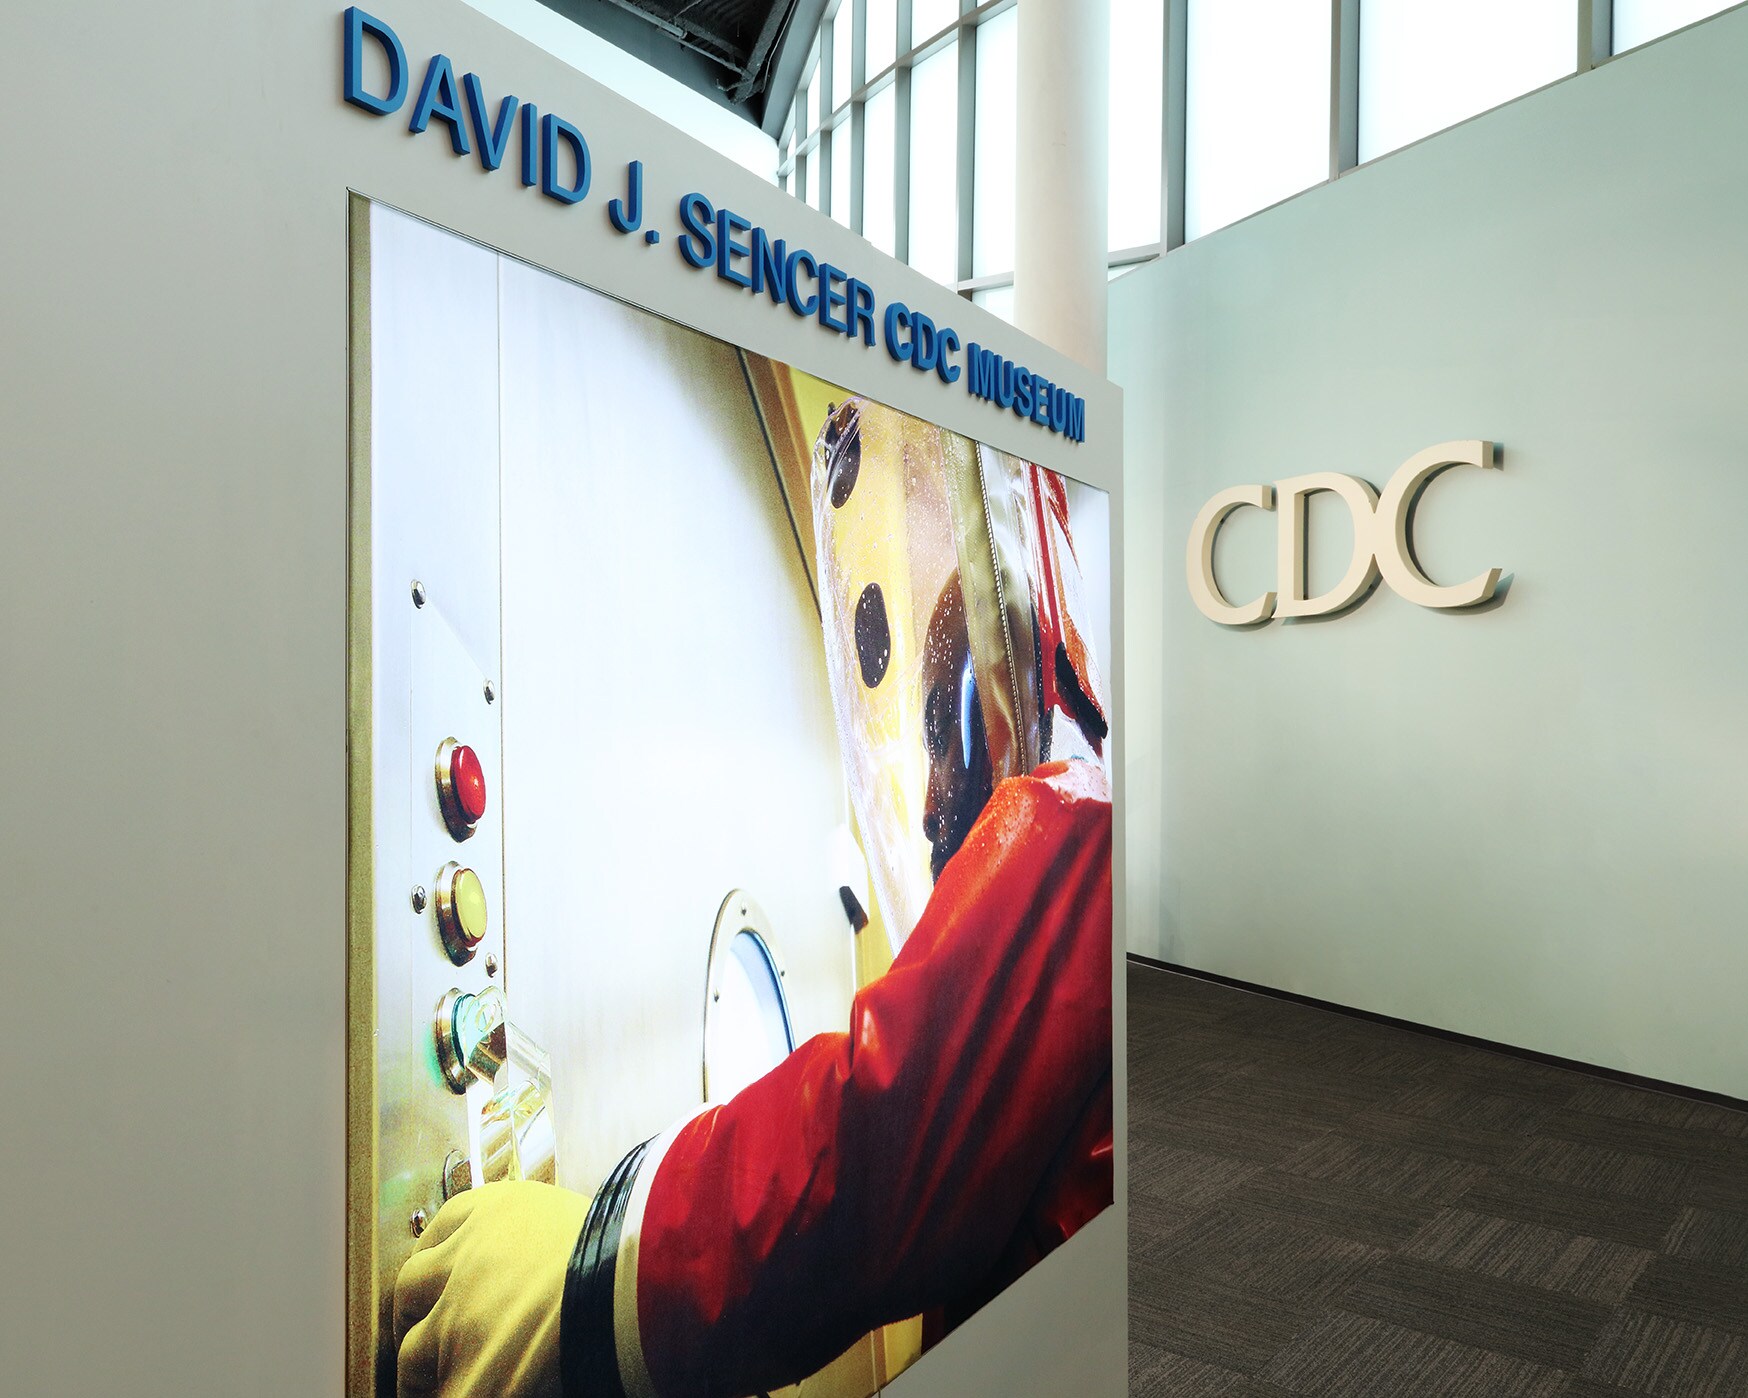 A photo of a cdc museum exhibit.